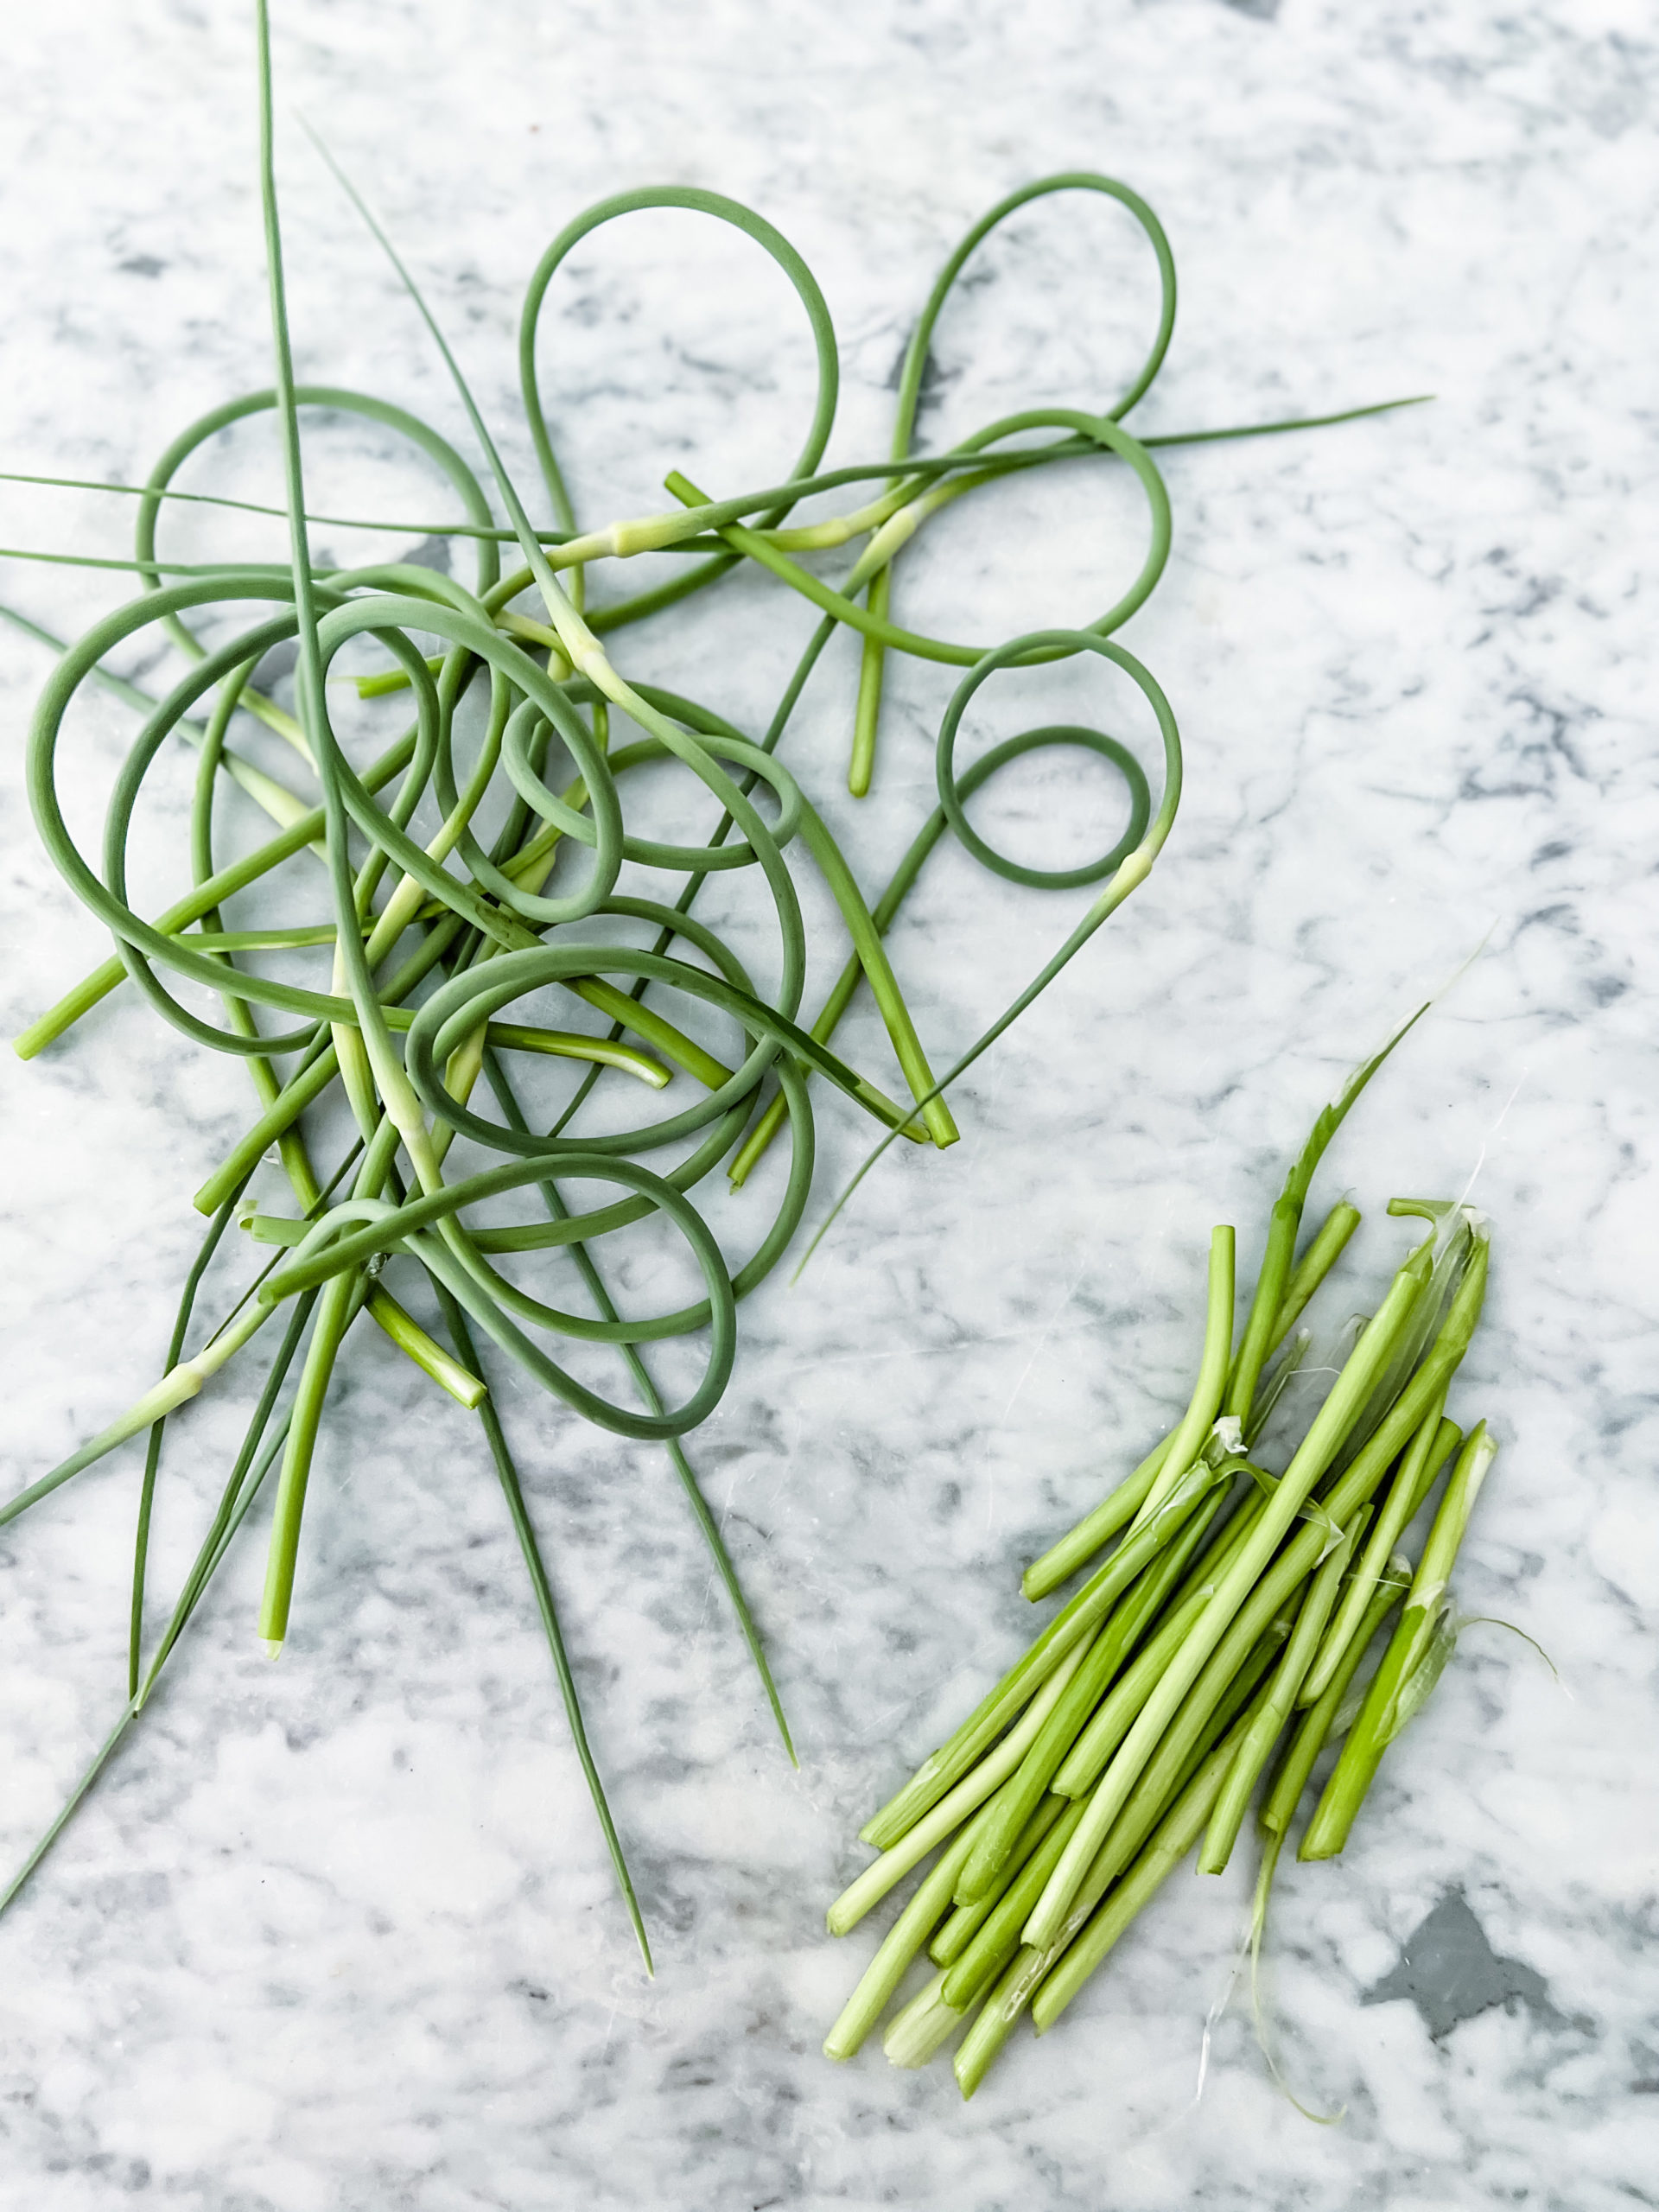 garlic scapes, washed and trimmed of the woody bottoms